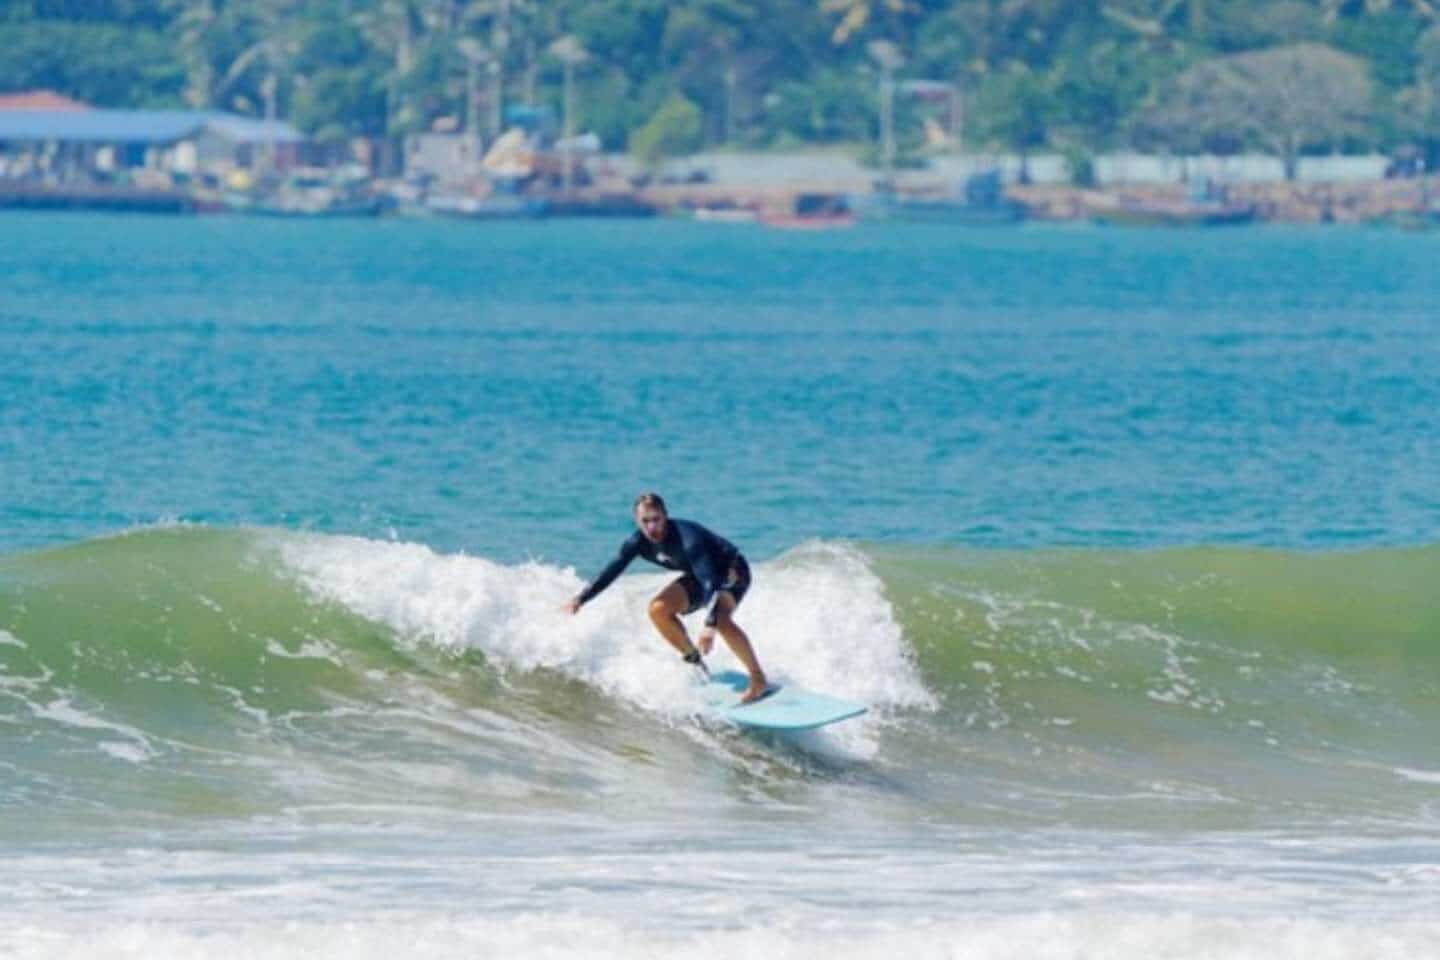 Surfing in Sri Lanka is unlike anywhere else in the world